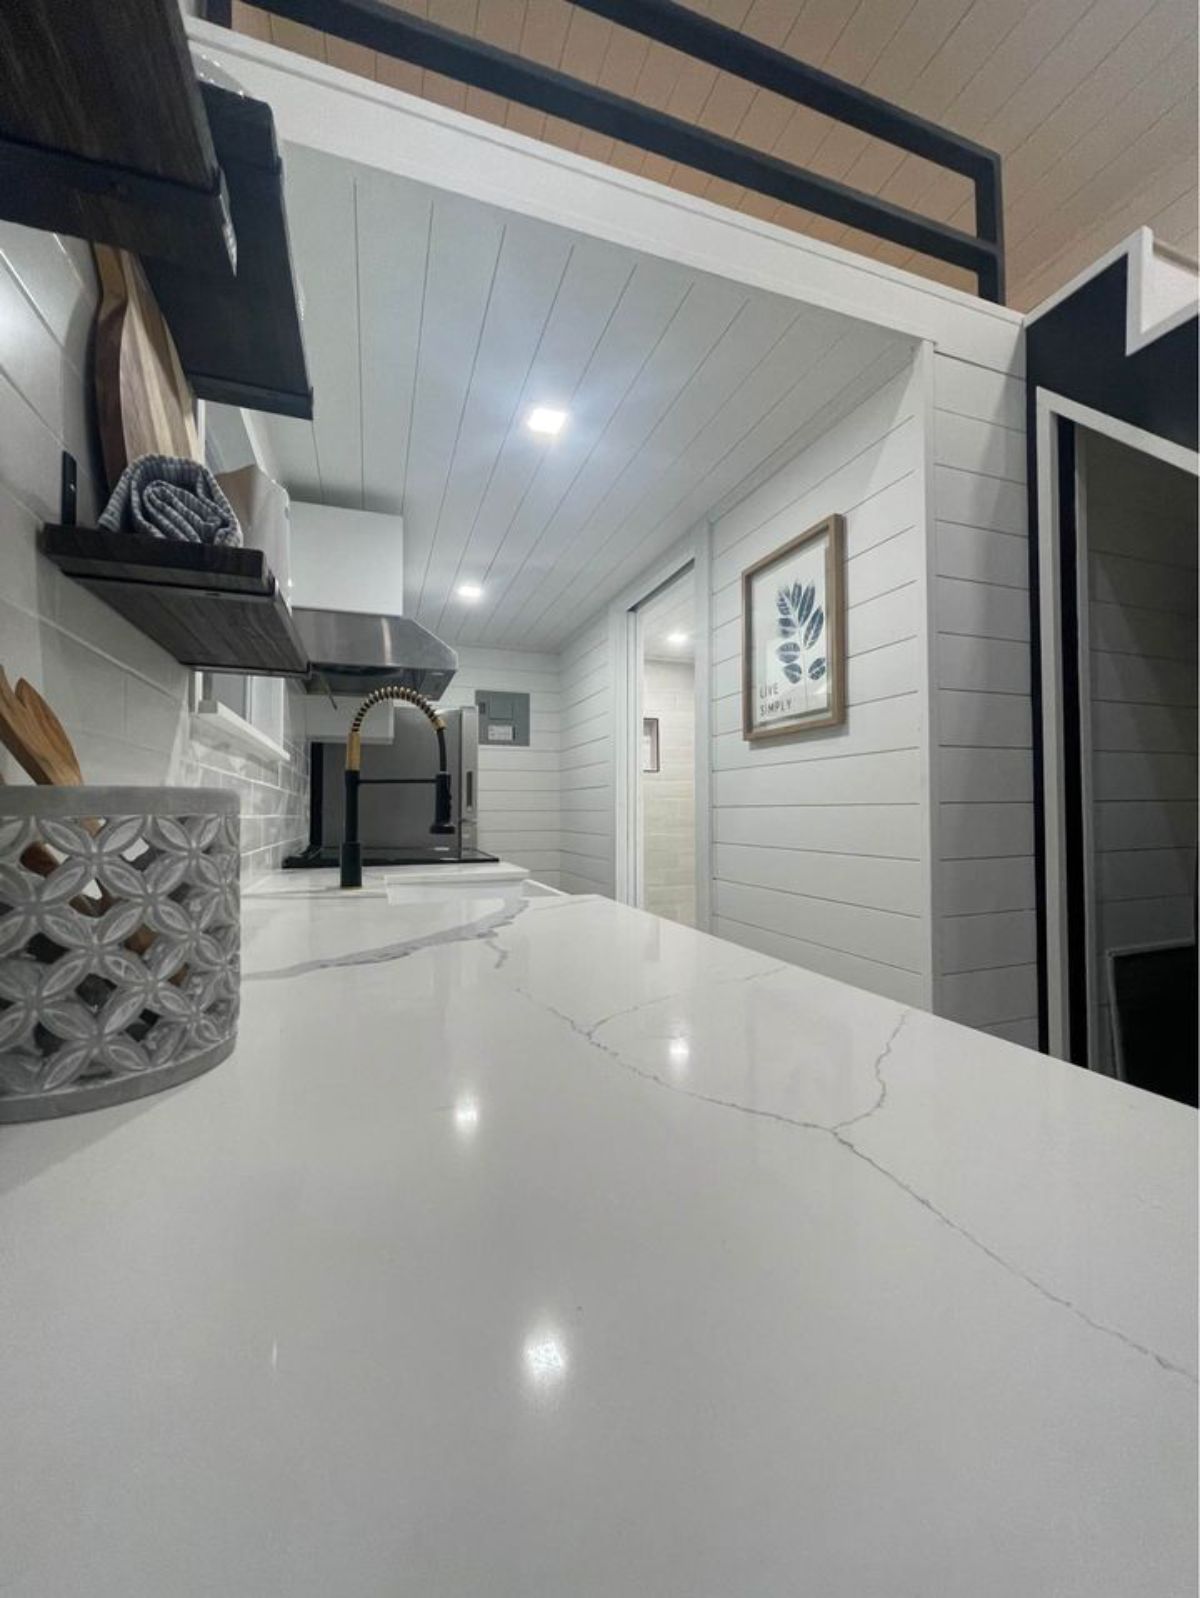 view across white marble counter in kitchen of tiny home showing open door to bathroom on right